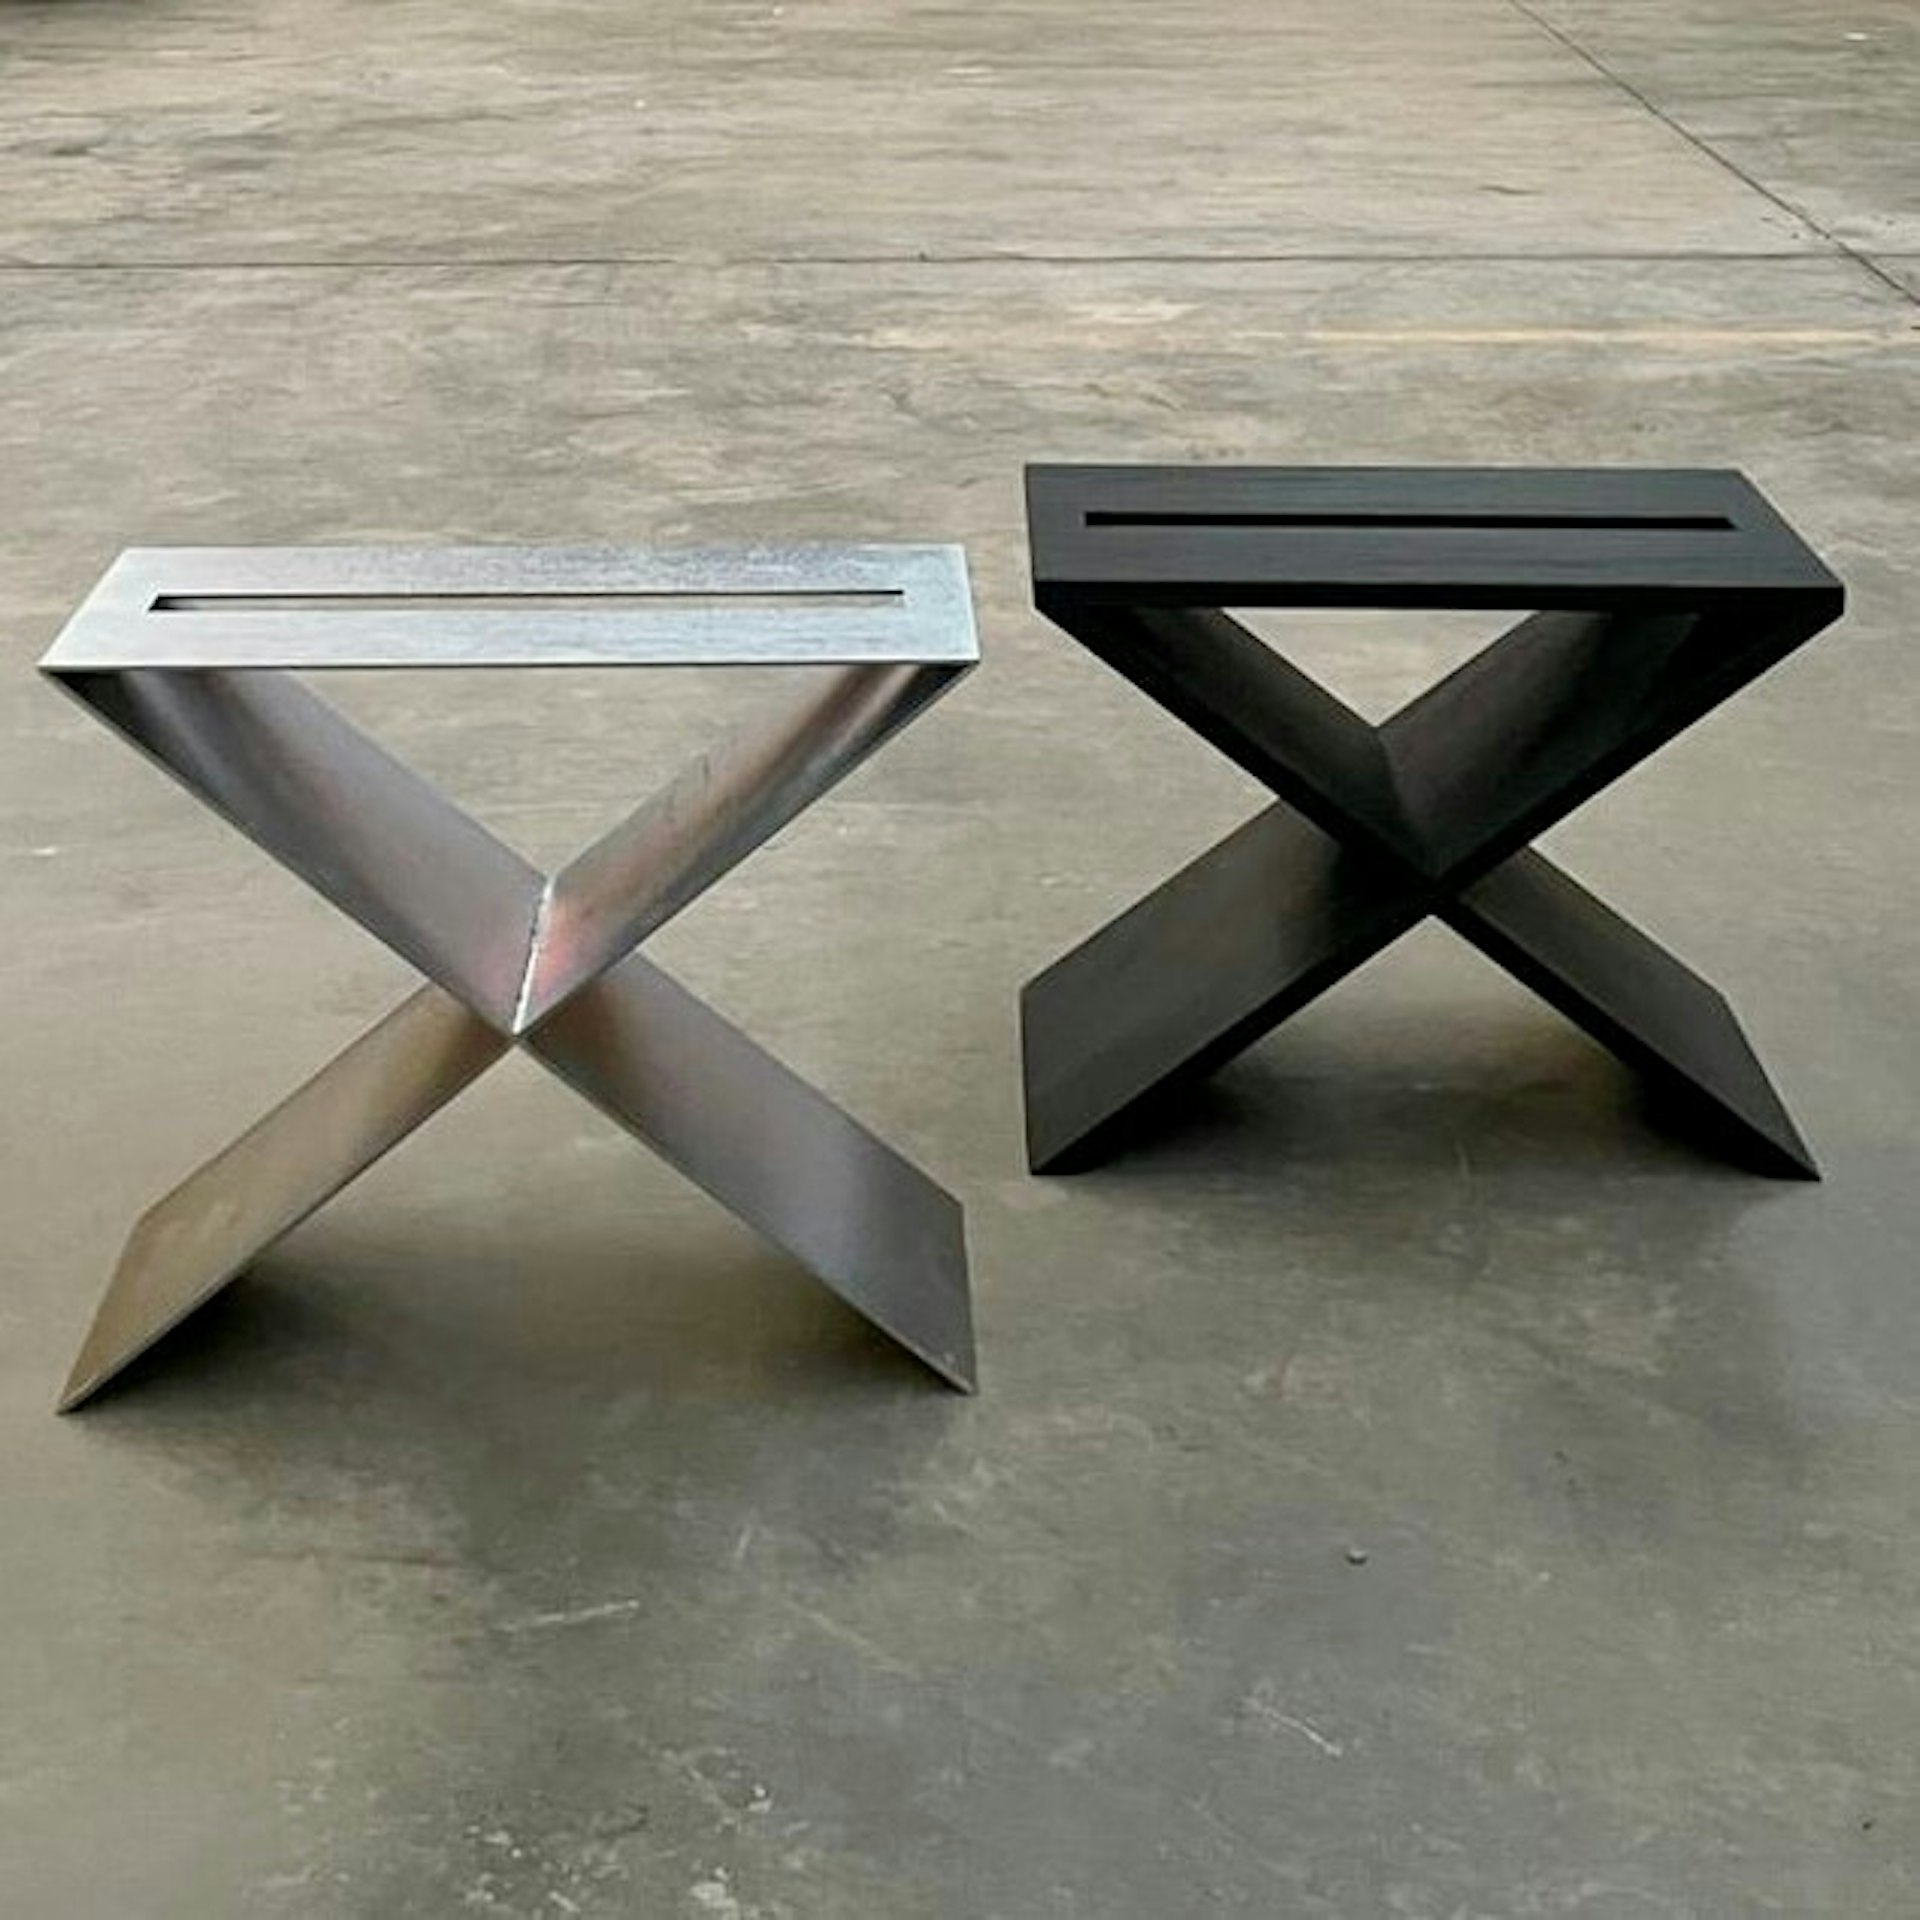 2 chairs, one steel and one wood, on a concrete floor